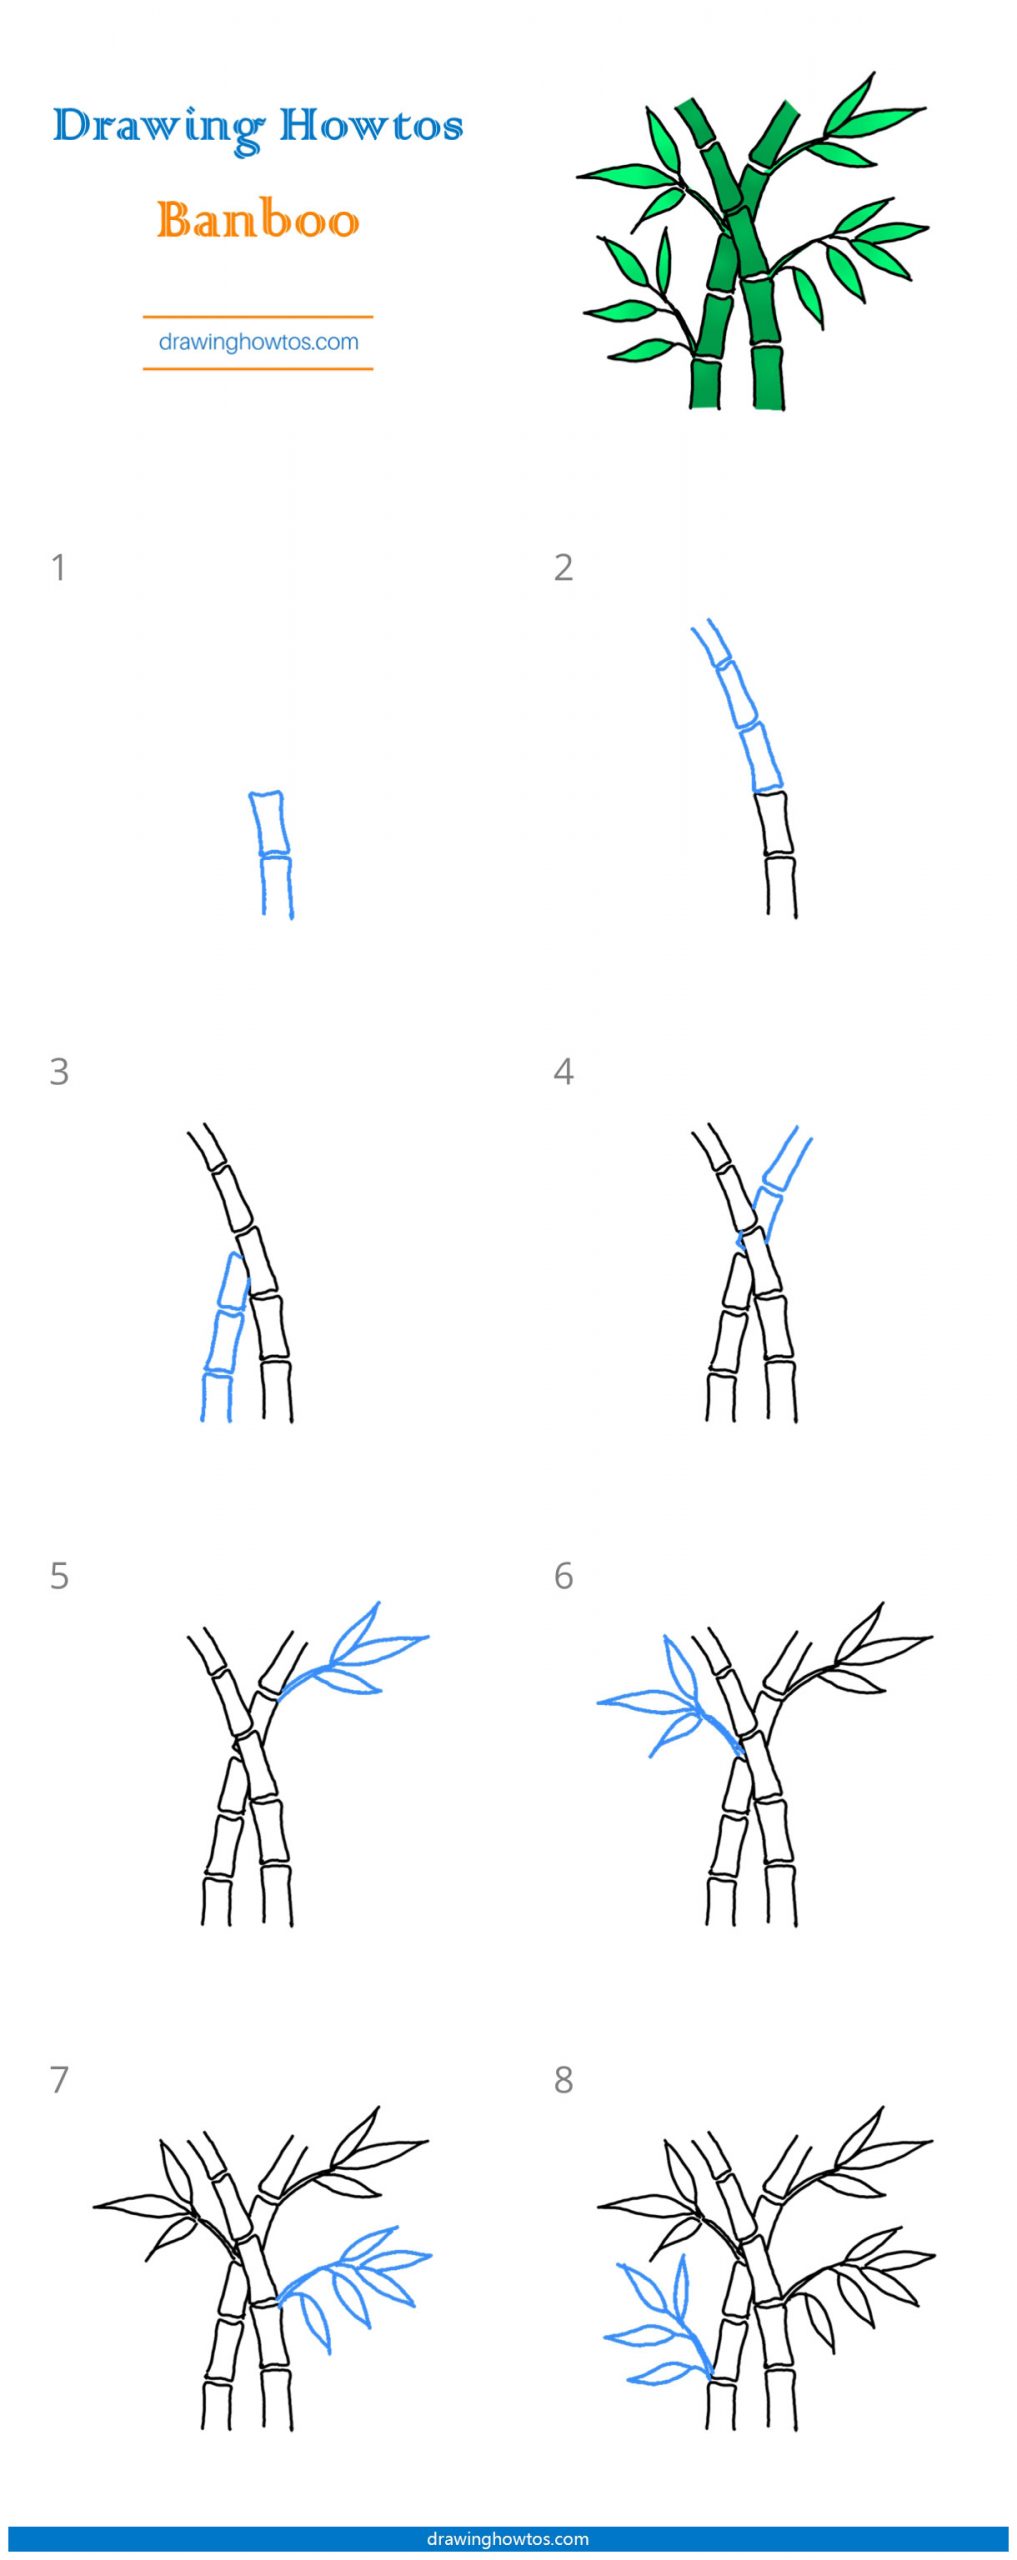 How to Draw Bamboo Step by Step